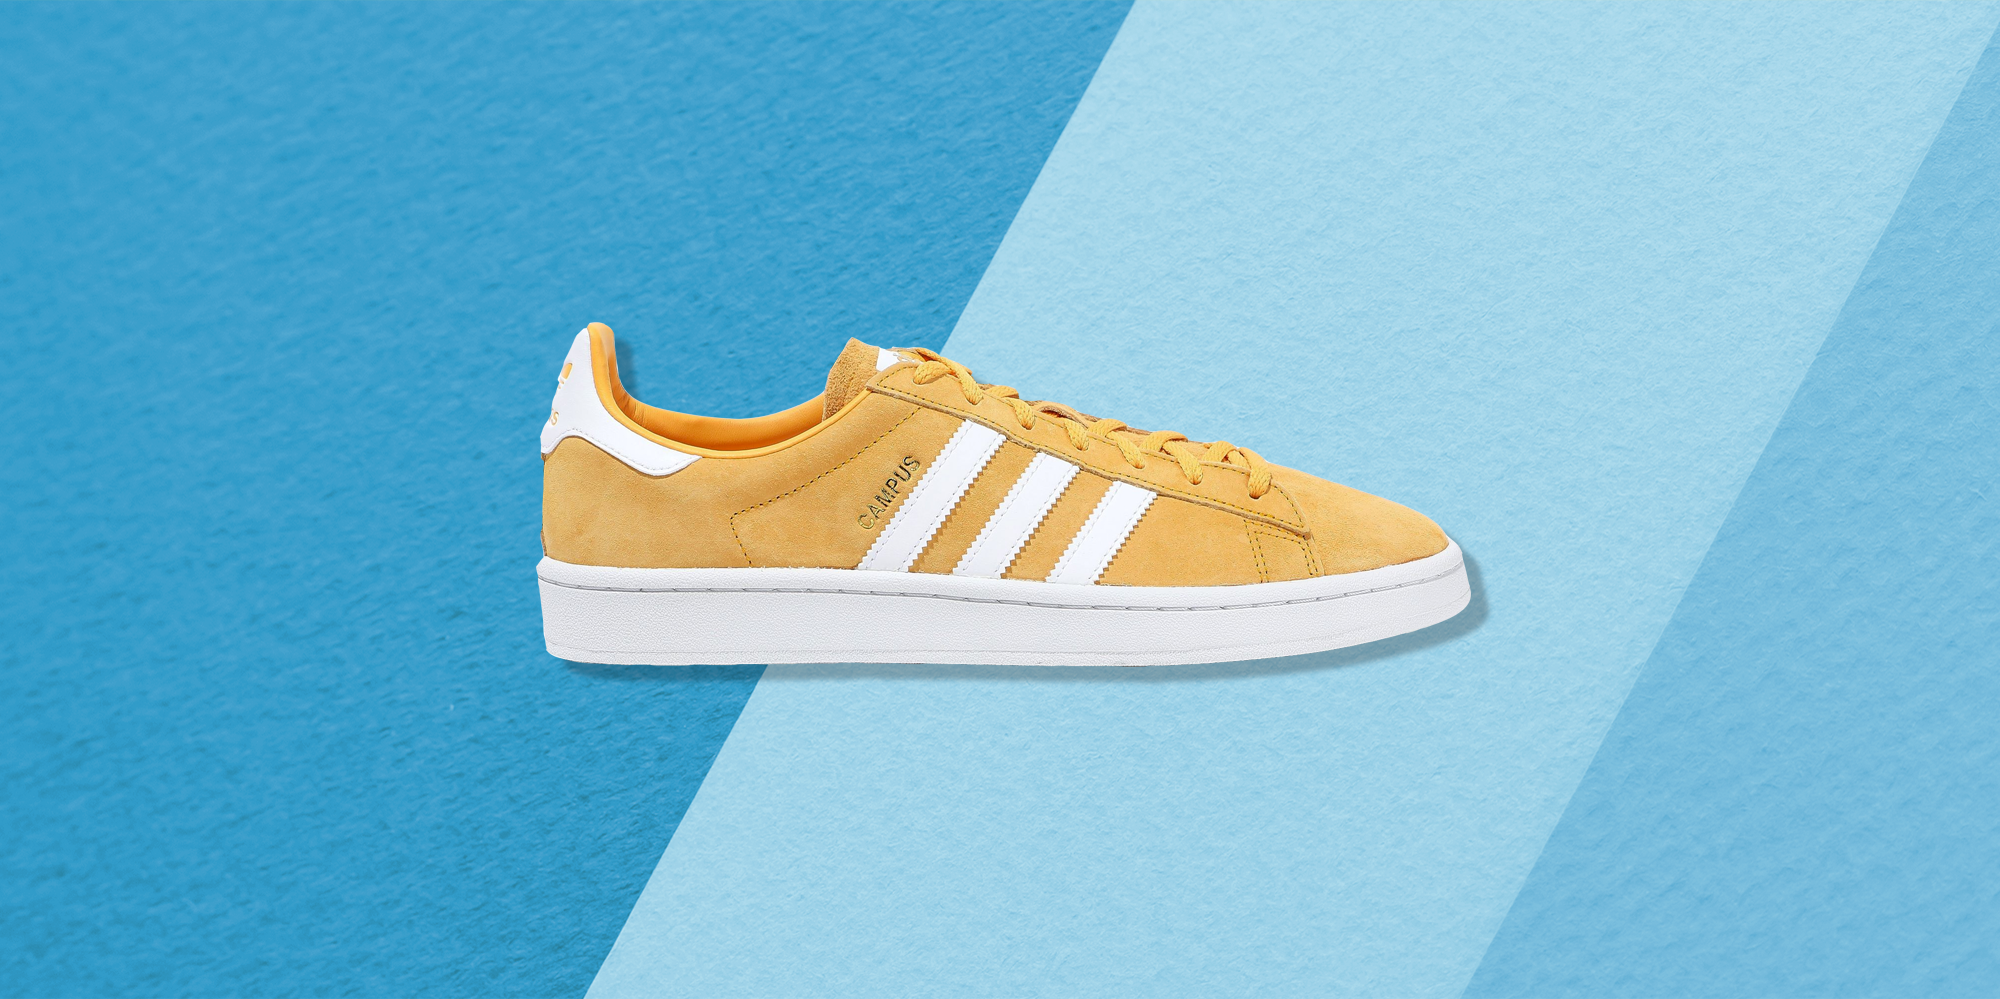 Sale On Adidas Shoes 